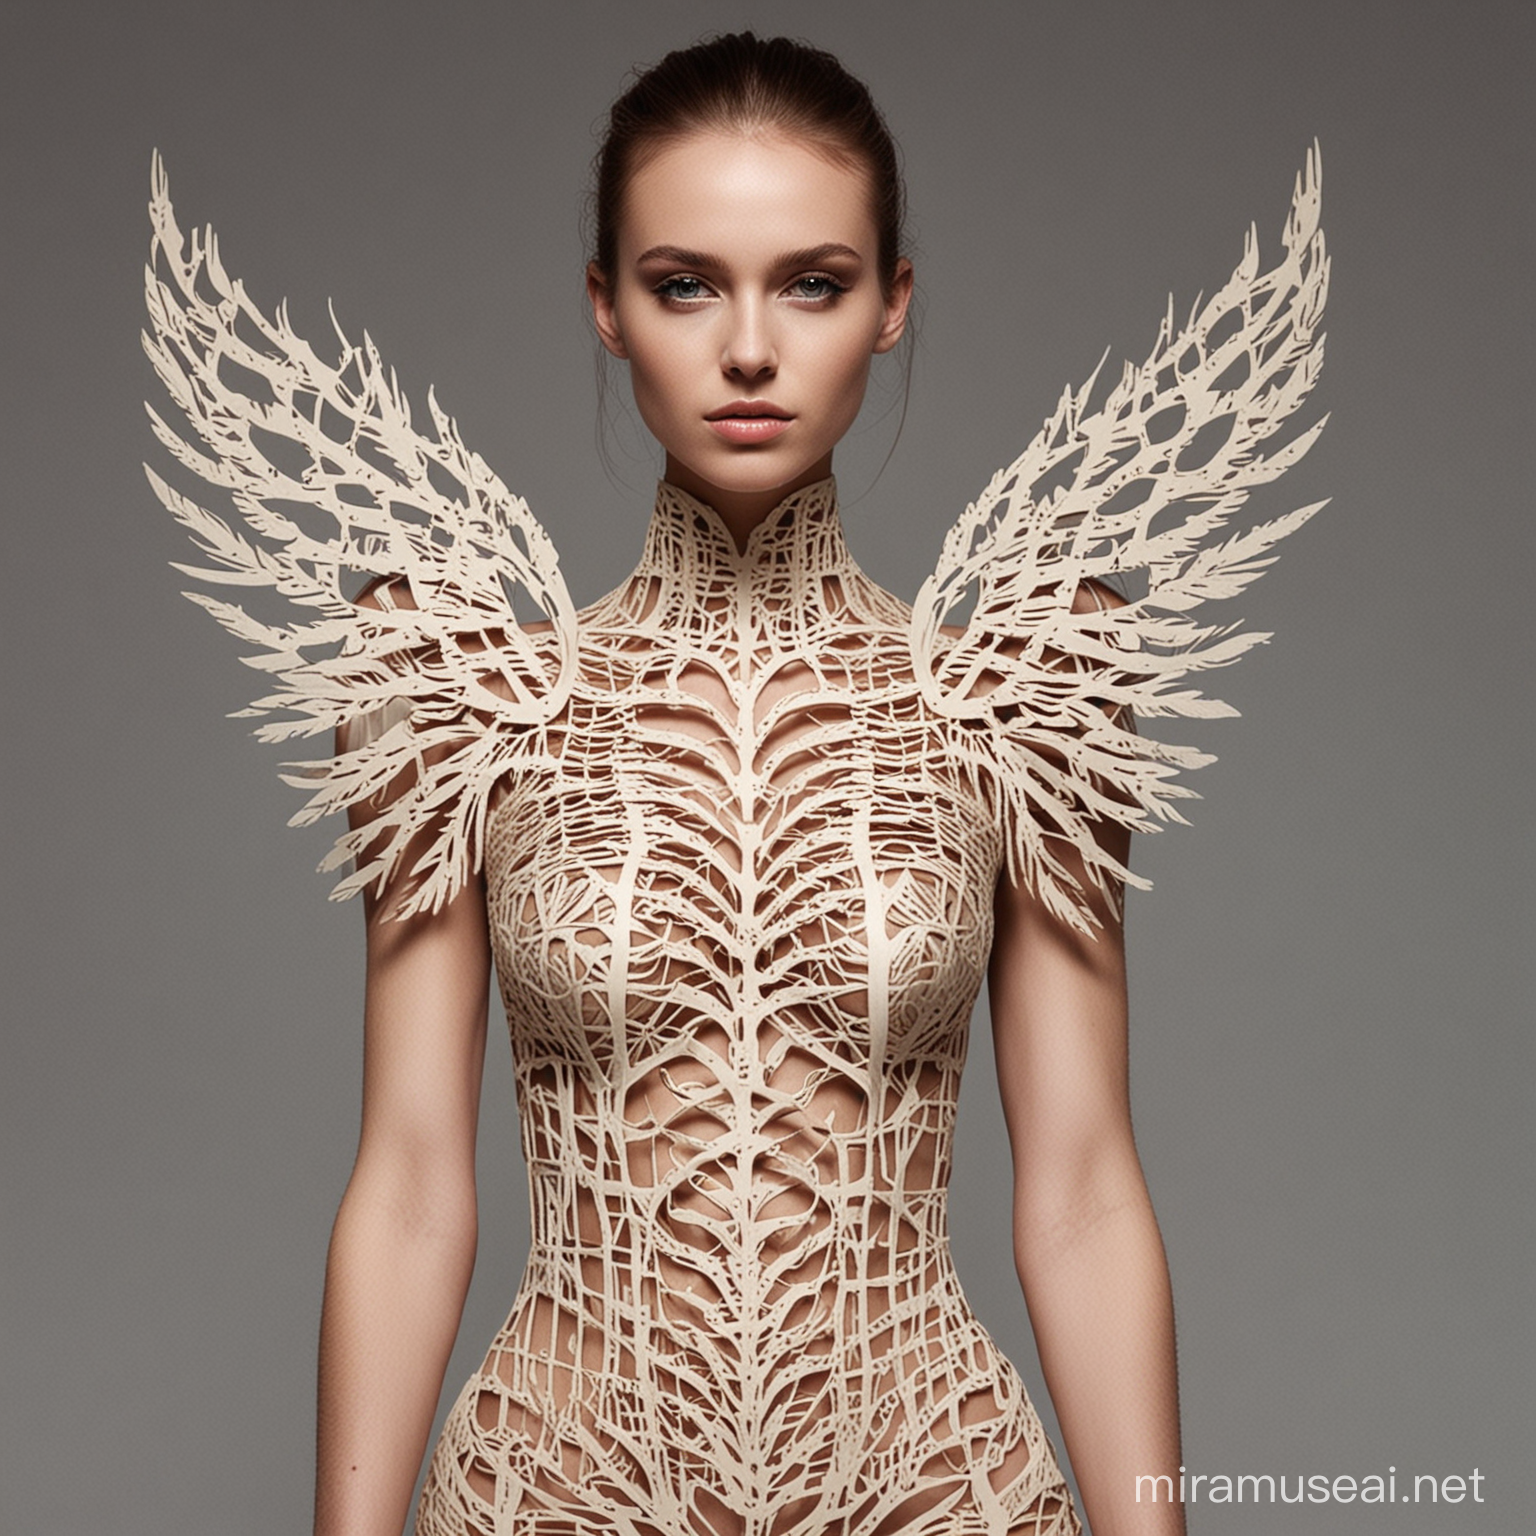 create an avant garde wearable art inspired by laser cut in  ribcage structural in some part of body and feathers look